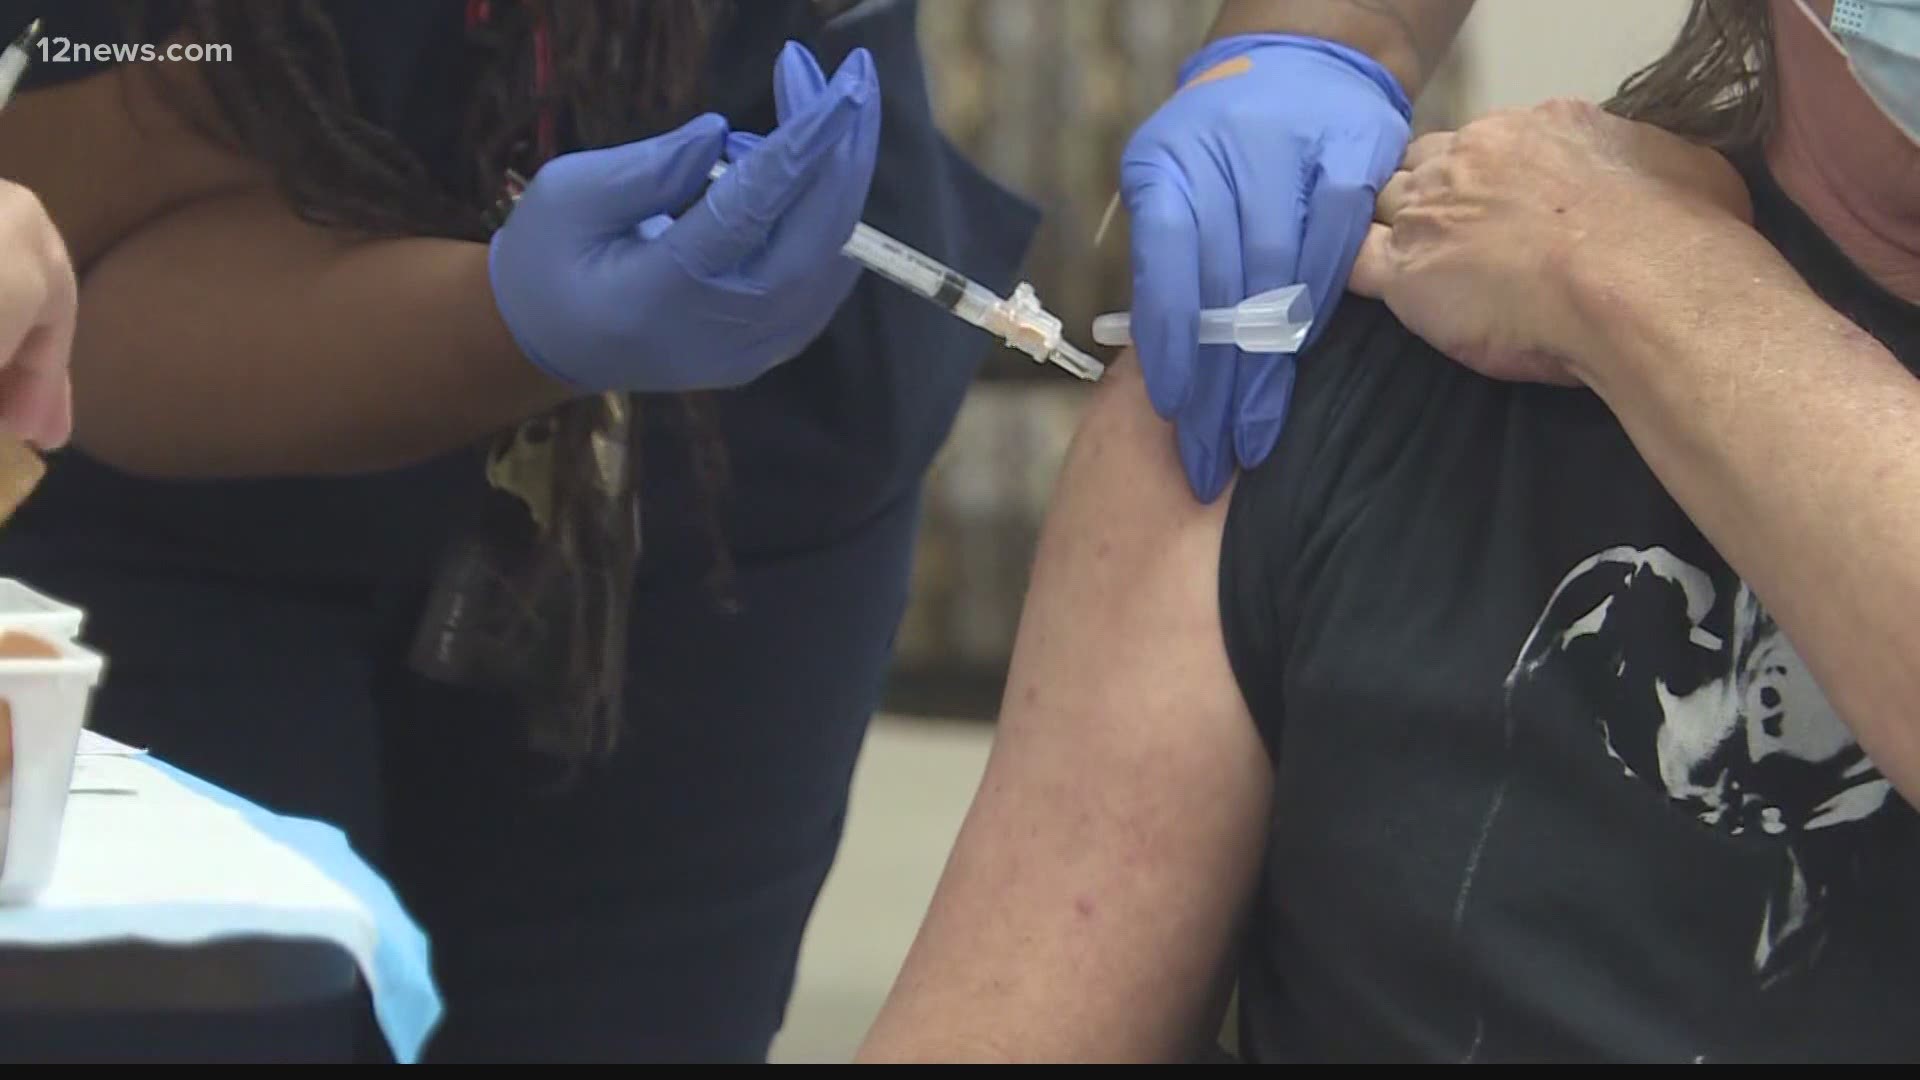 Banner Health, Arizona's largest employer, is requiring all employees to get vaccinated. And according to the Equal Employment Opportunity Commission, it is legal.